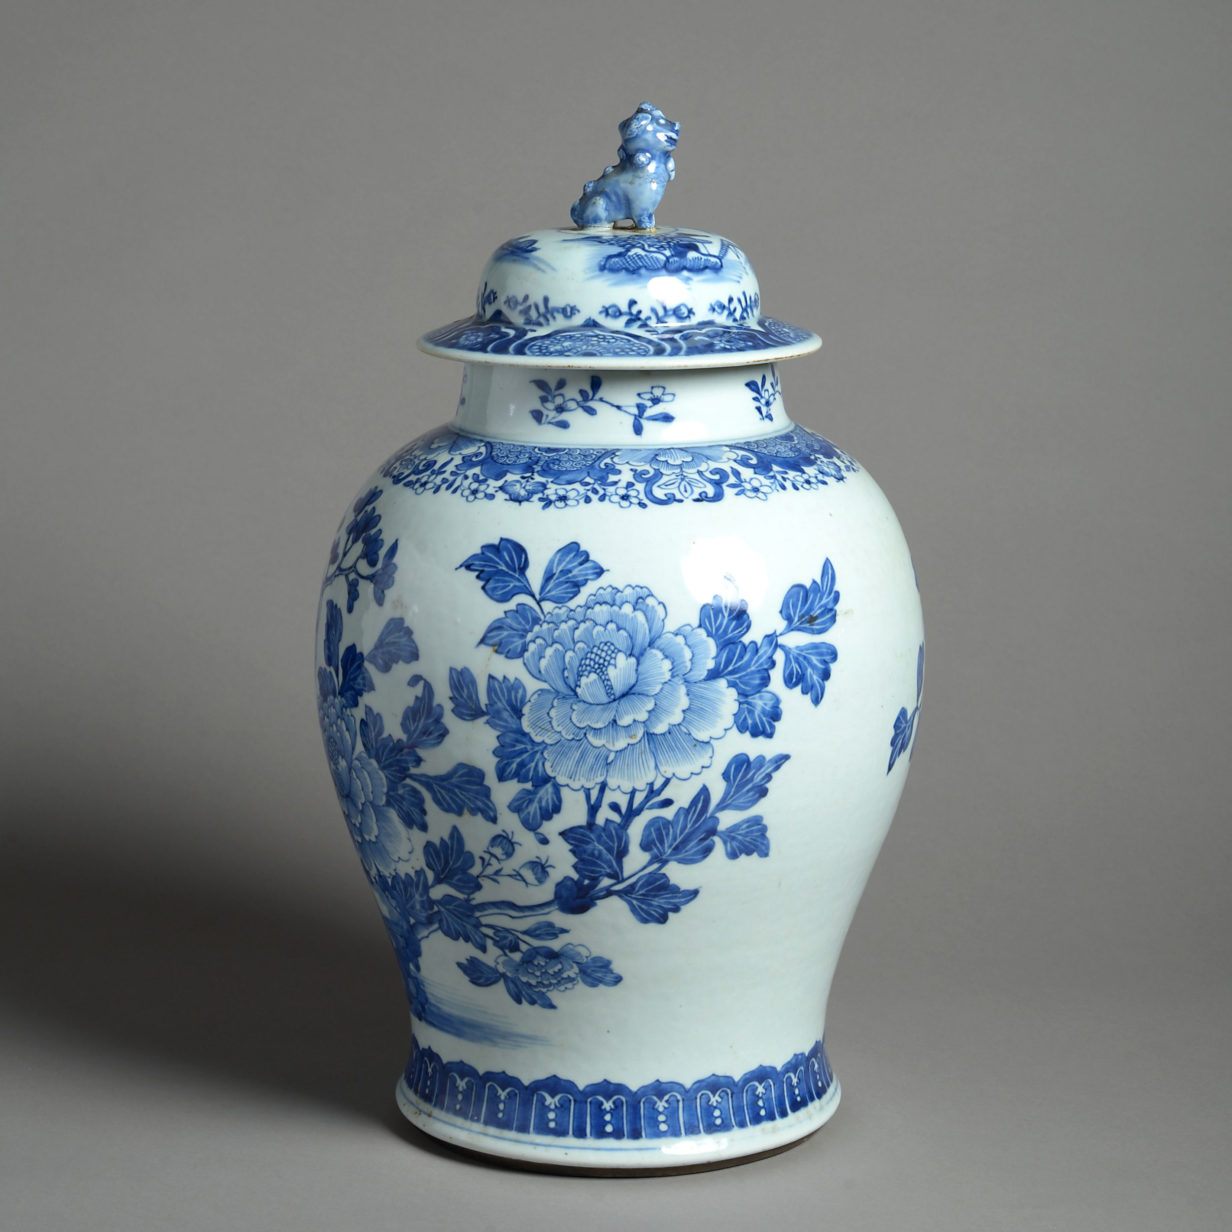 An 18th century blue & white porcelain vase and cover